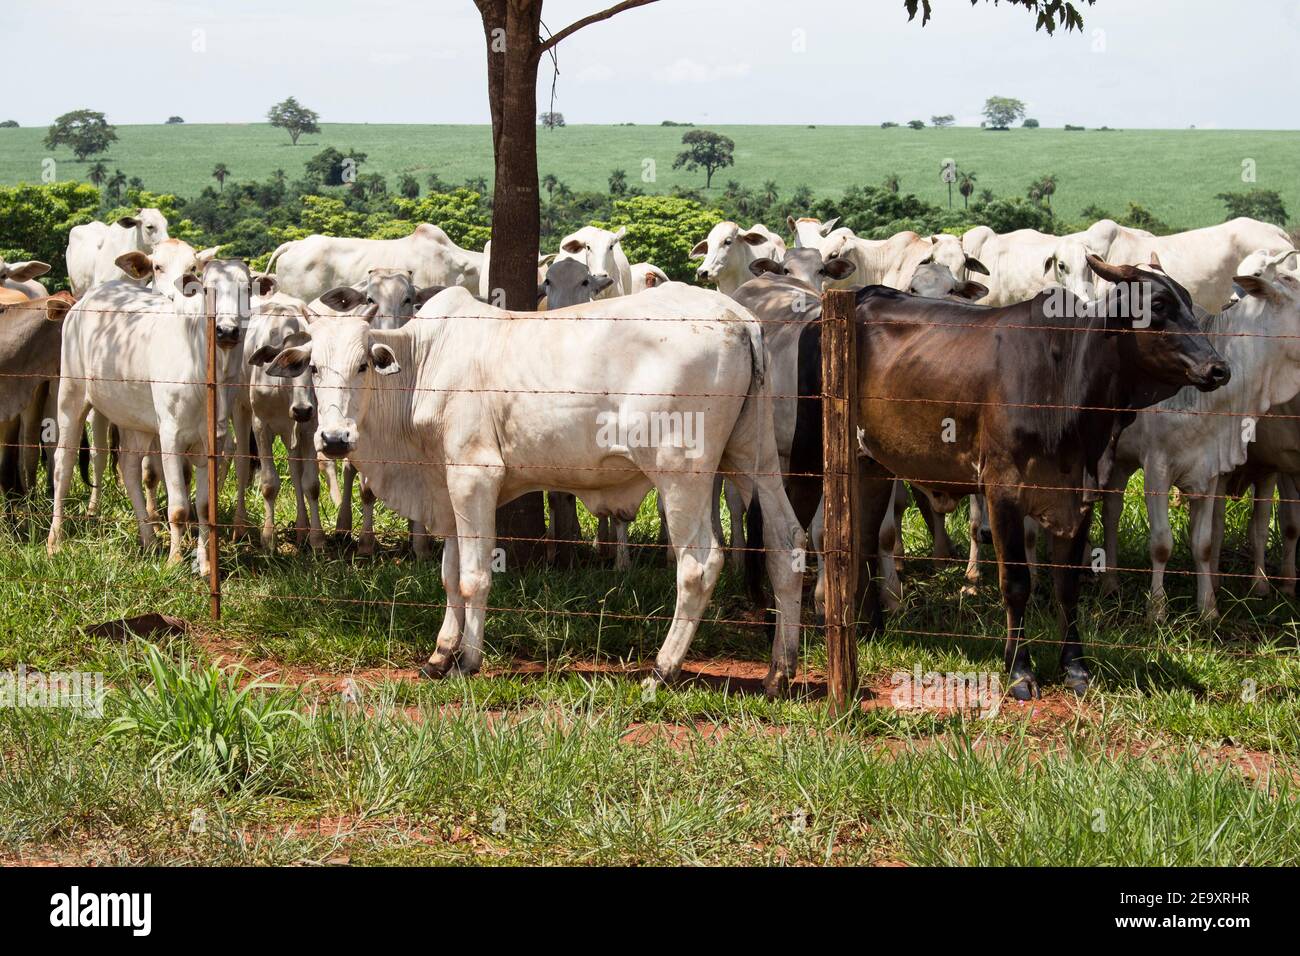 Multiple White and black cows starring with attention to the camera. Stock Photo